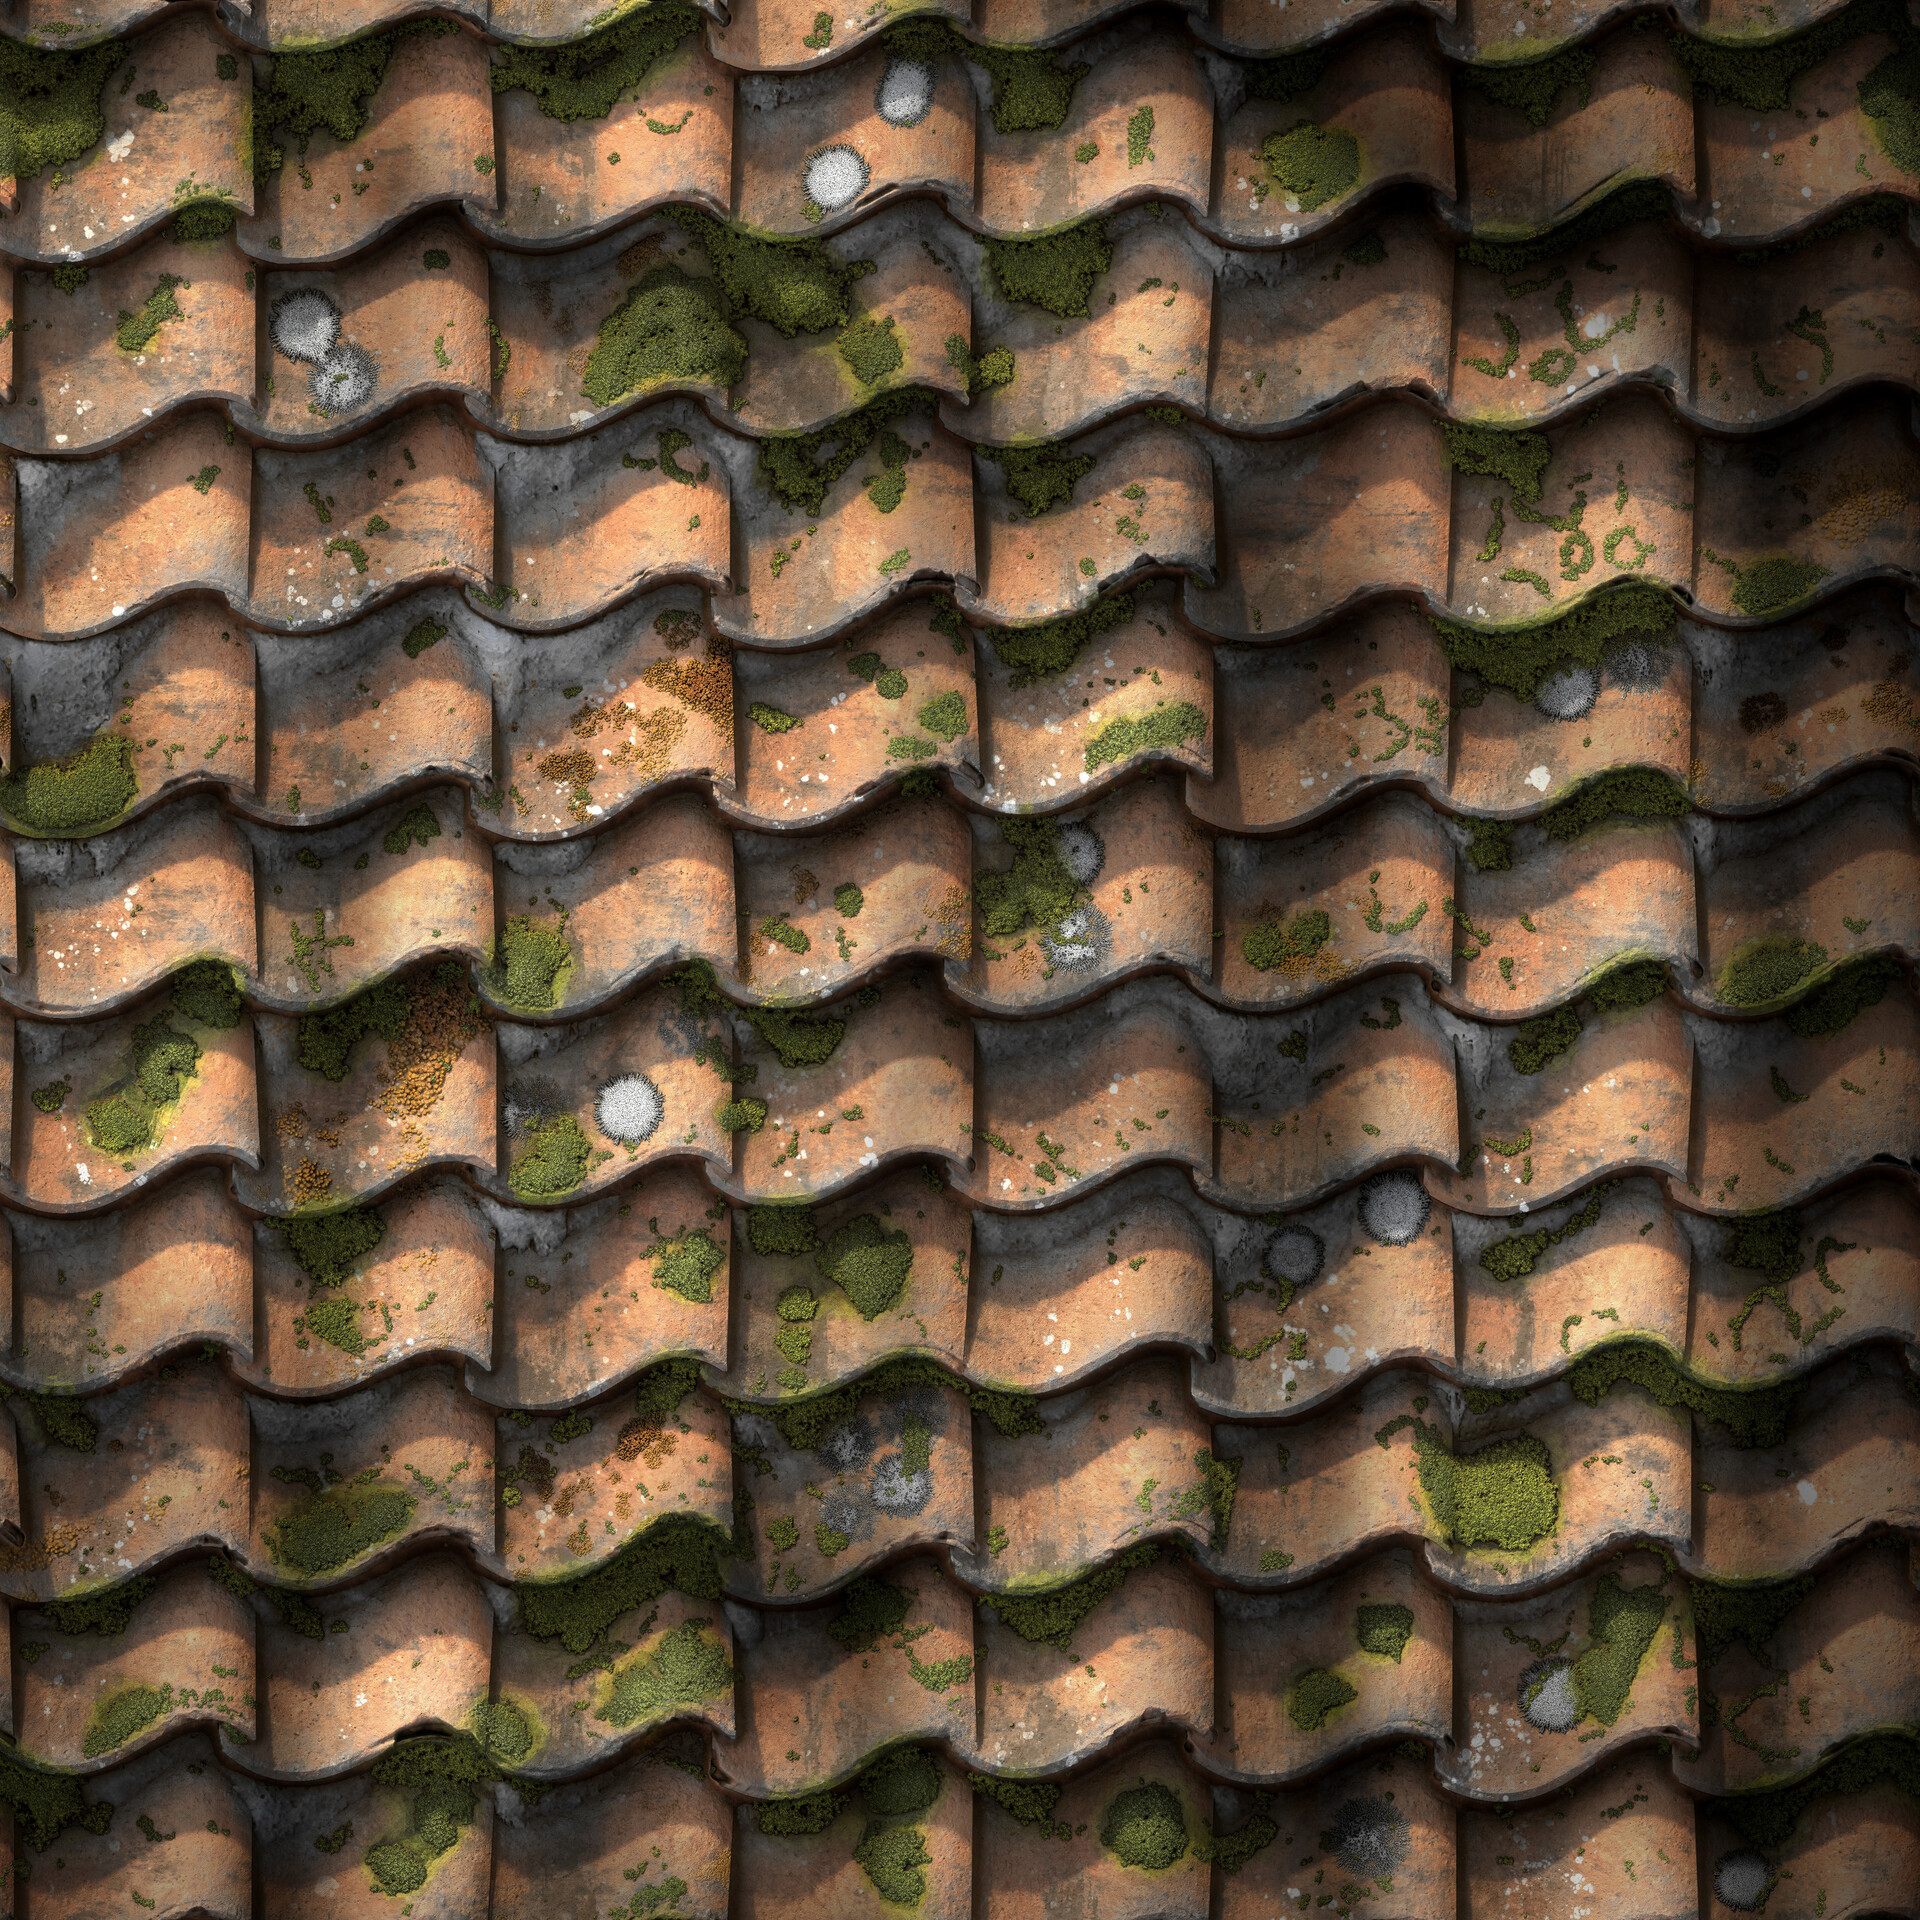 PBR Roof Tiles Material Study